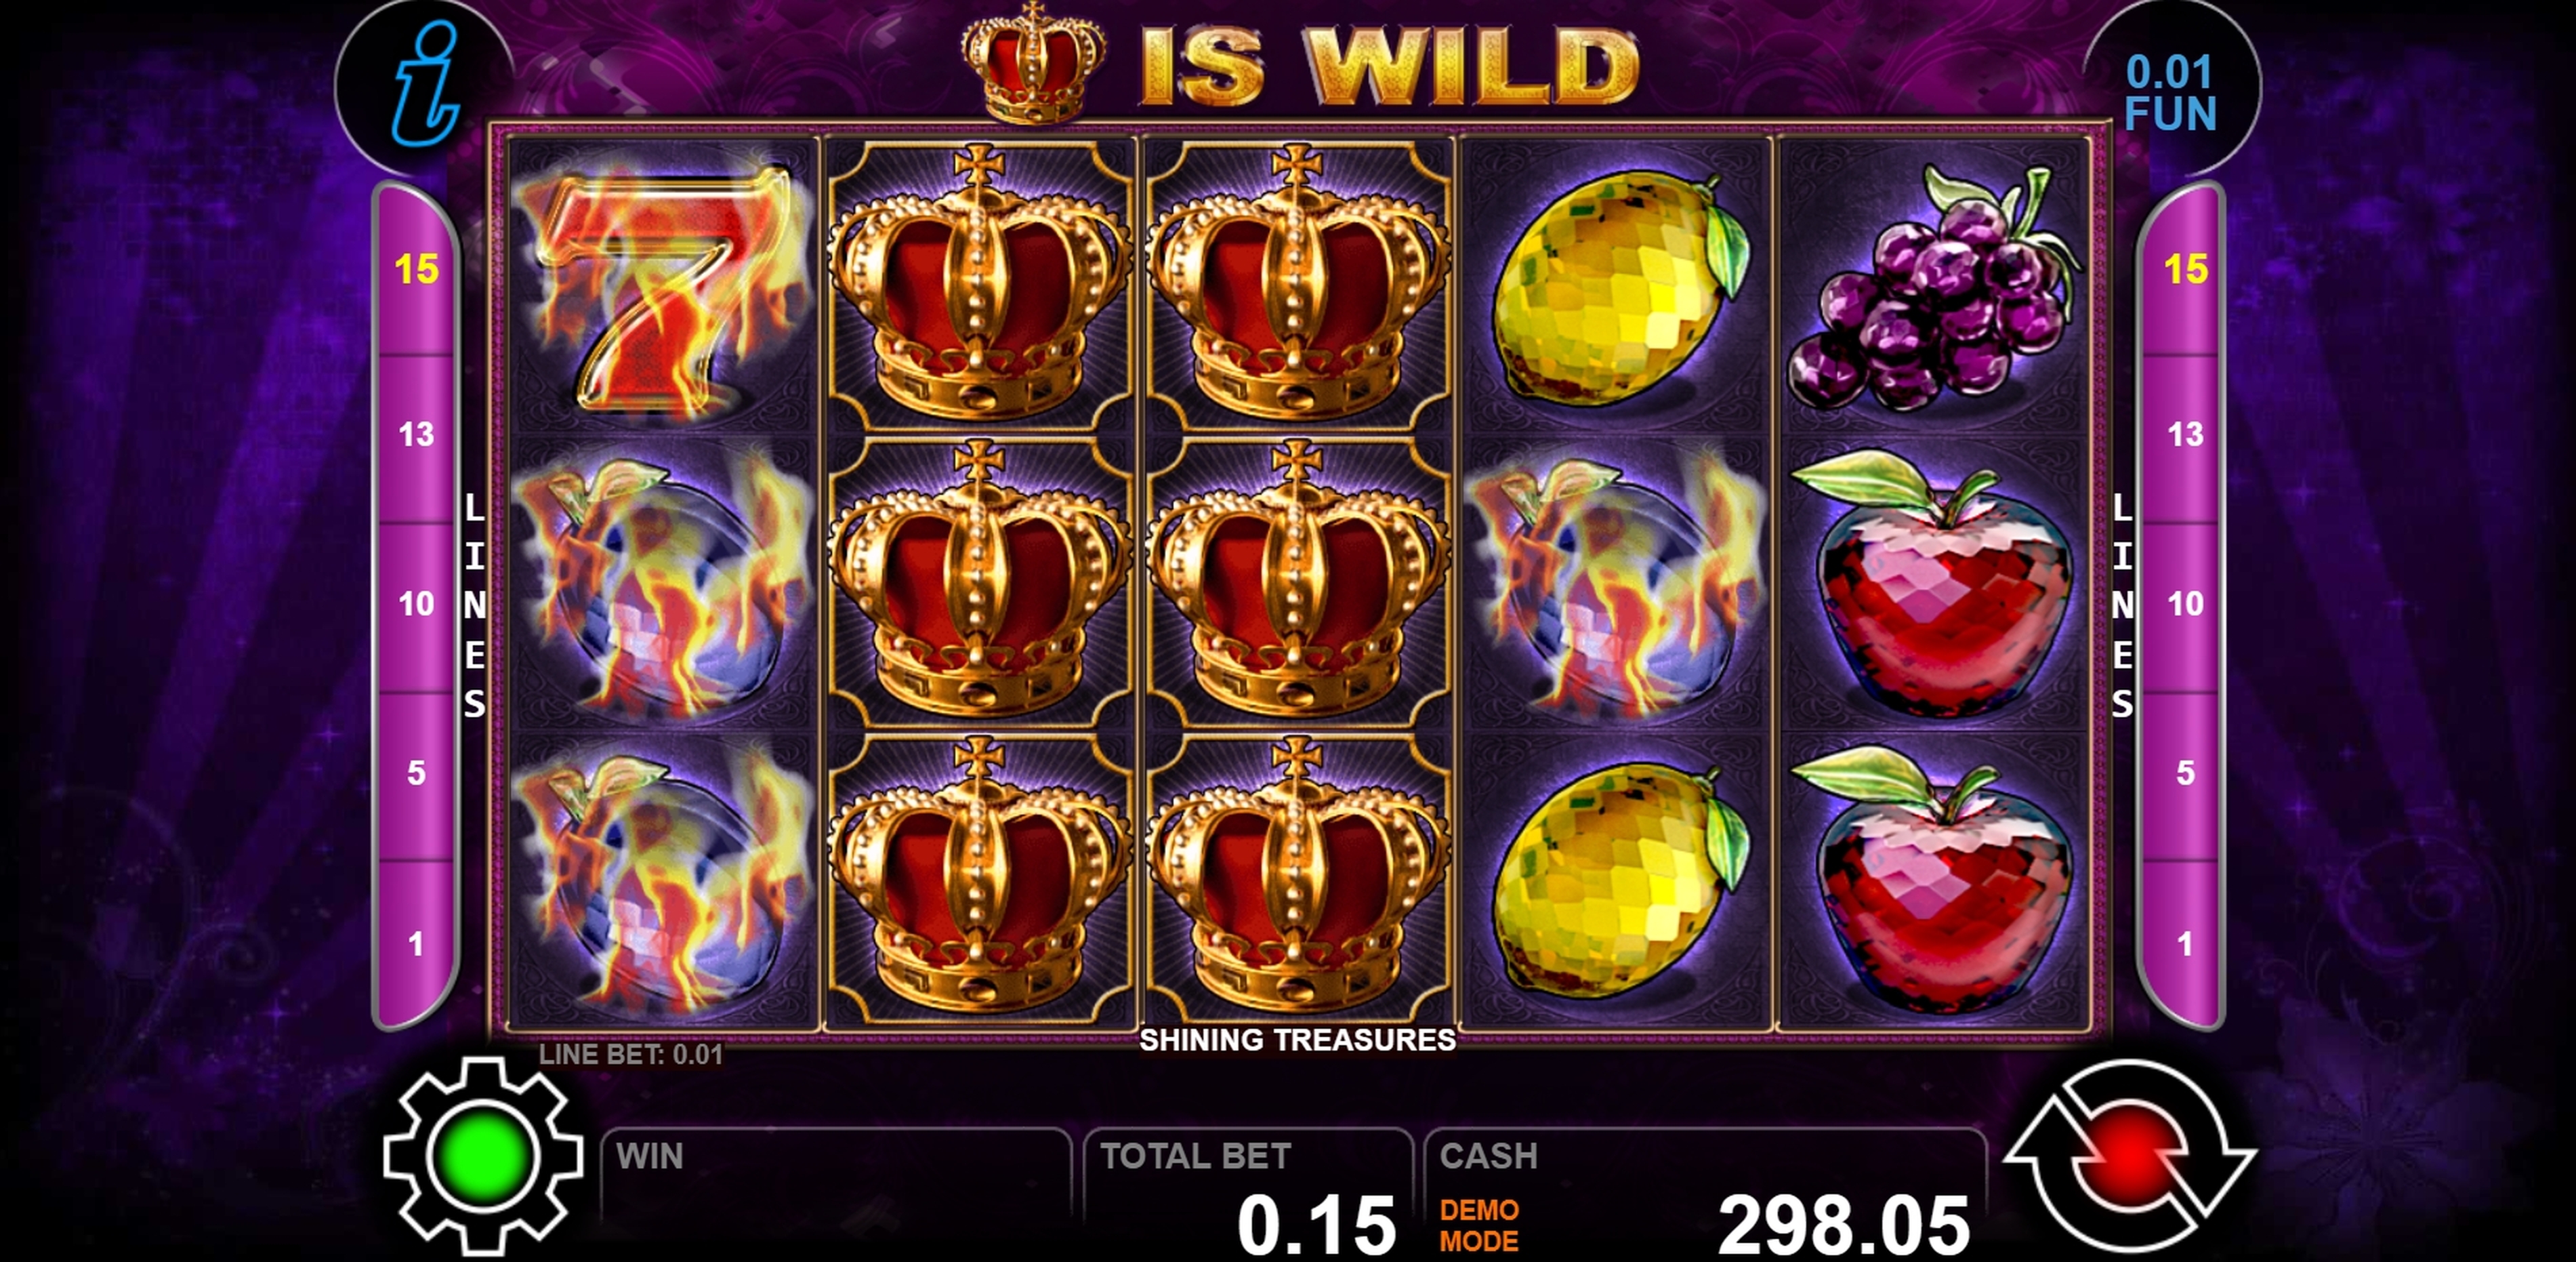 Win Money in Shining Treasures Free Slot Game by casino technology